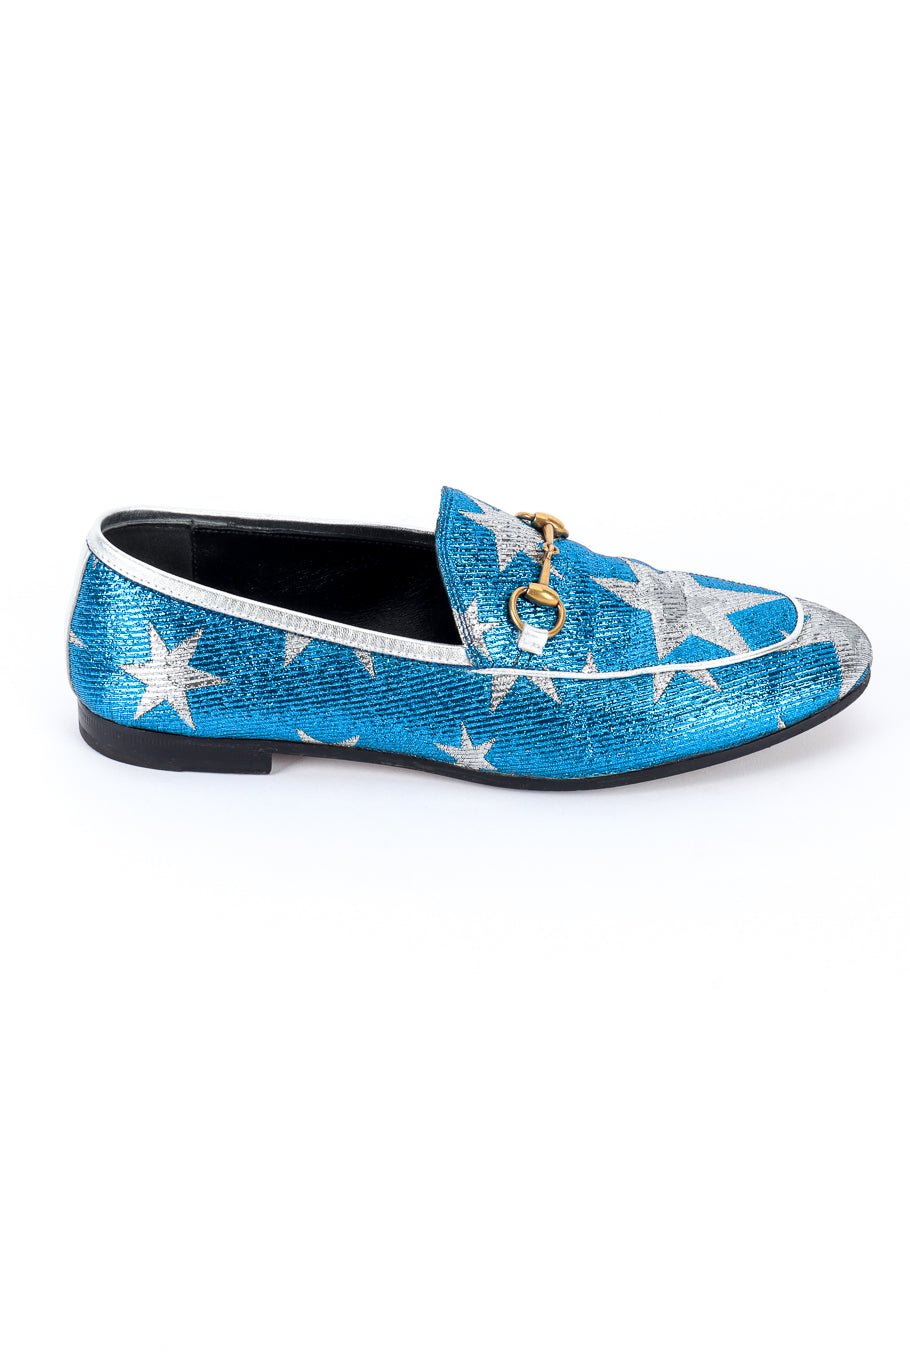 Gucci Starry Sky Lurex Loafers right shoe outer side @recess la